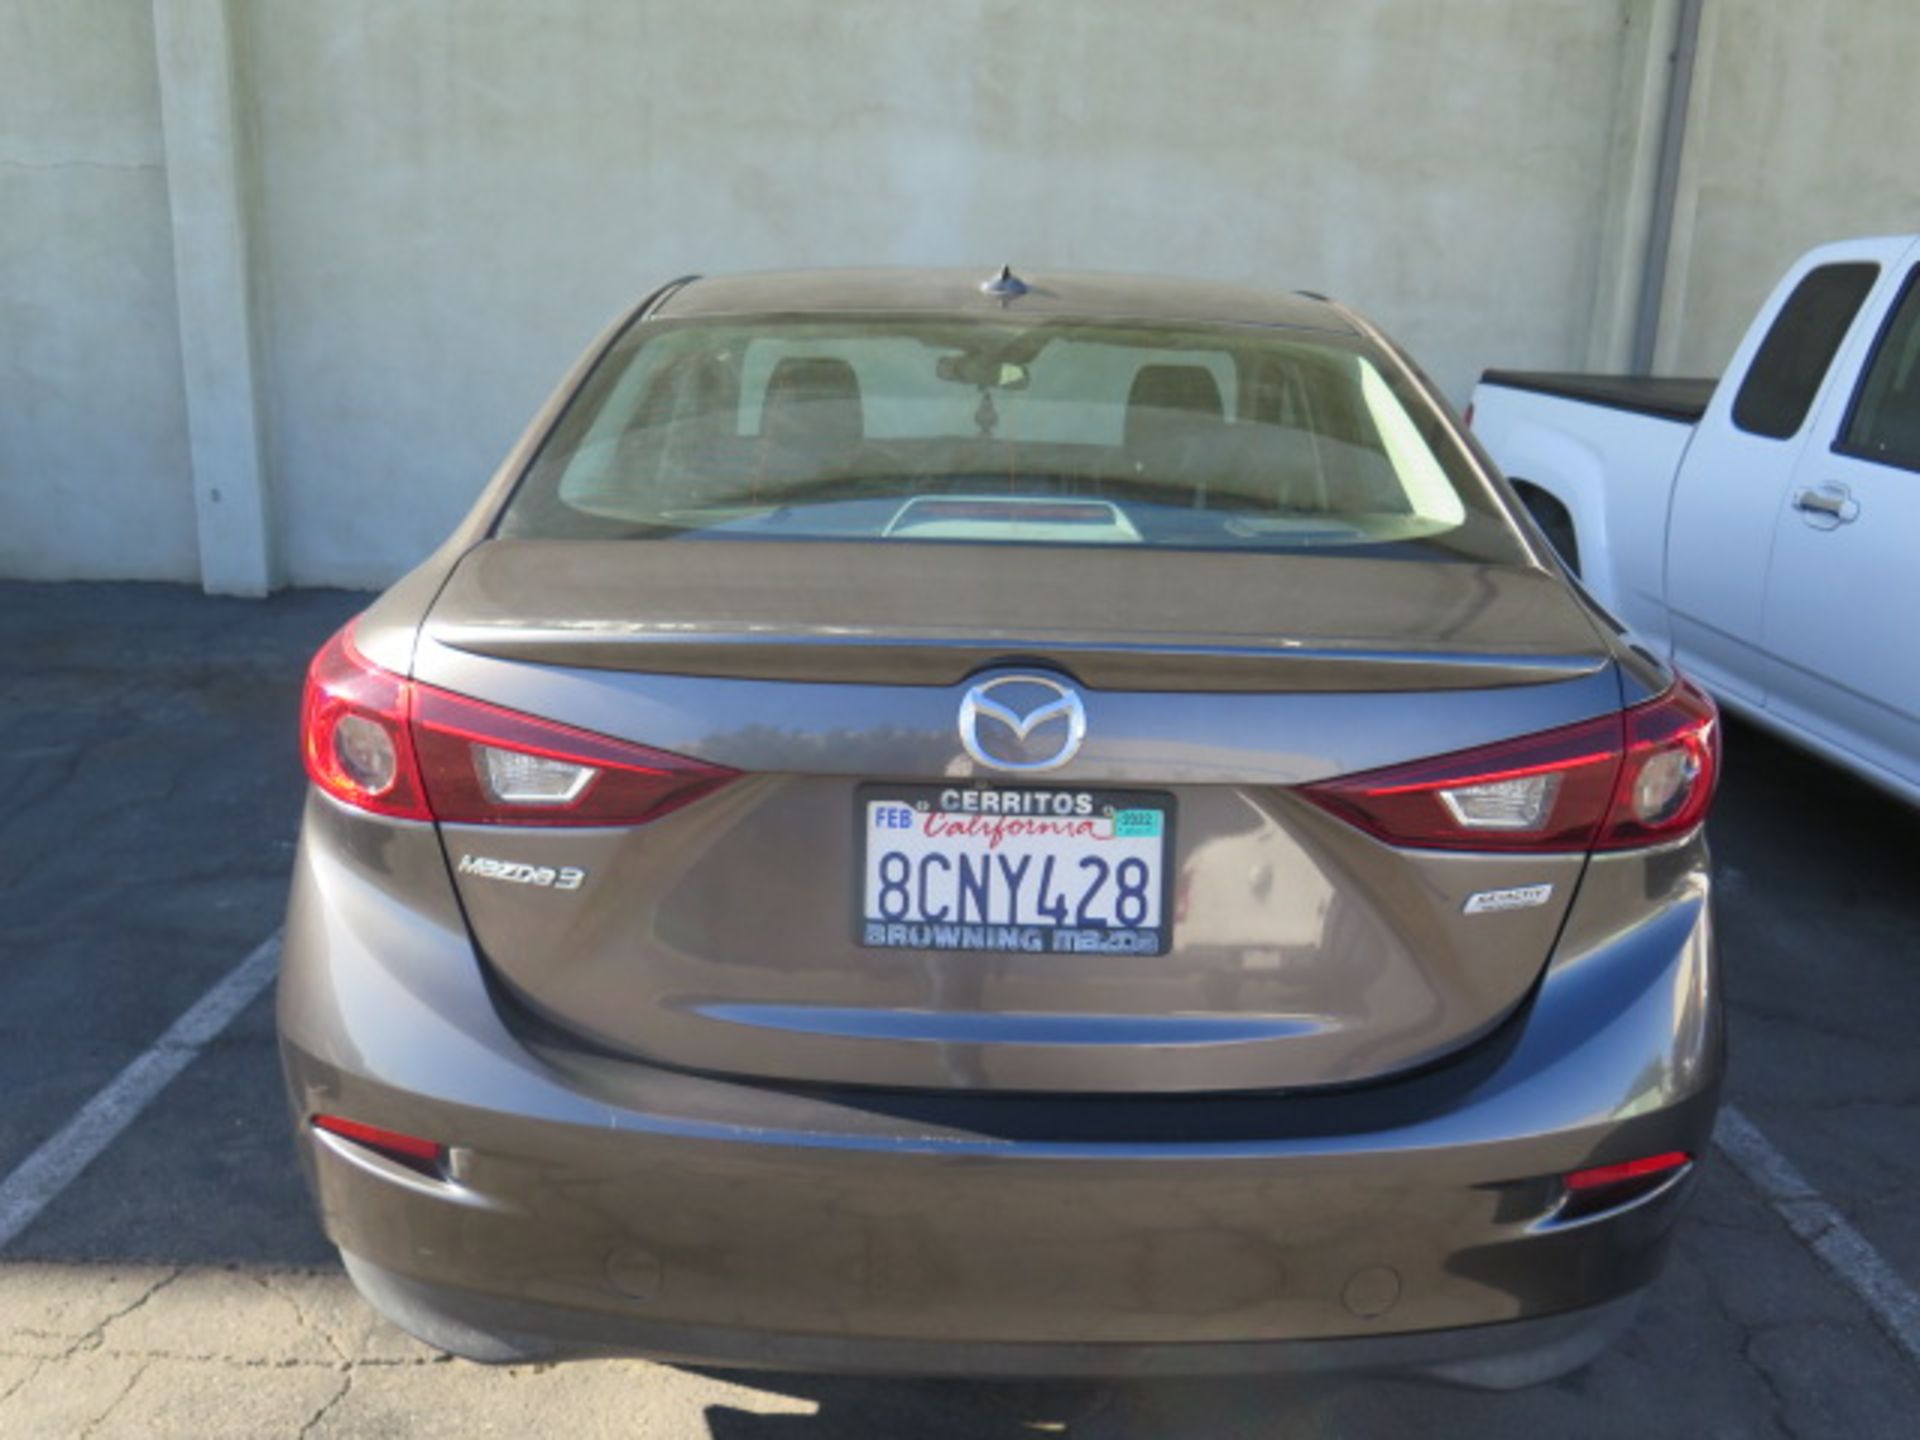 2018 Mazda 3 4-Door Sedan Lisc# 8CNY428 w/Gas Engine, Automatic Trans, Front End Damage, SOLD AS IS - Image 6 of 25